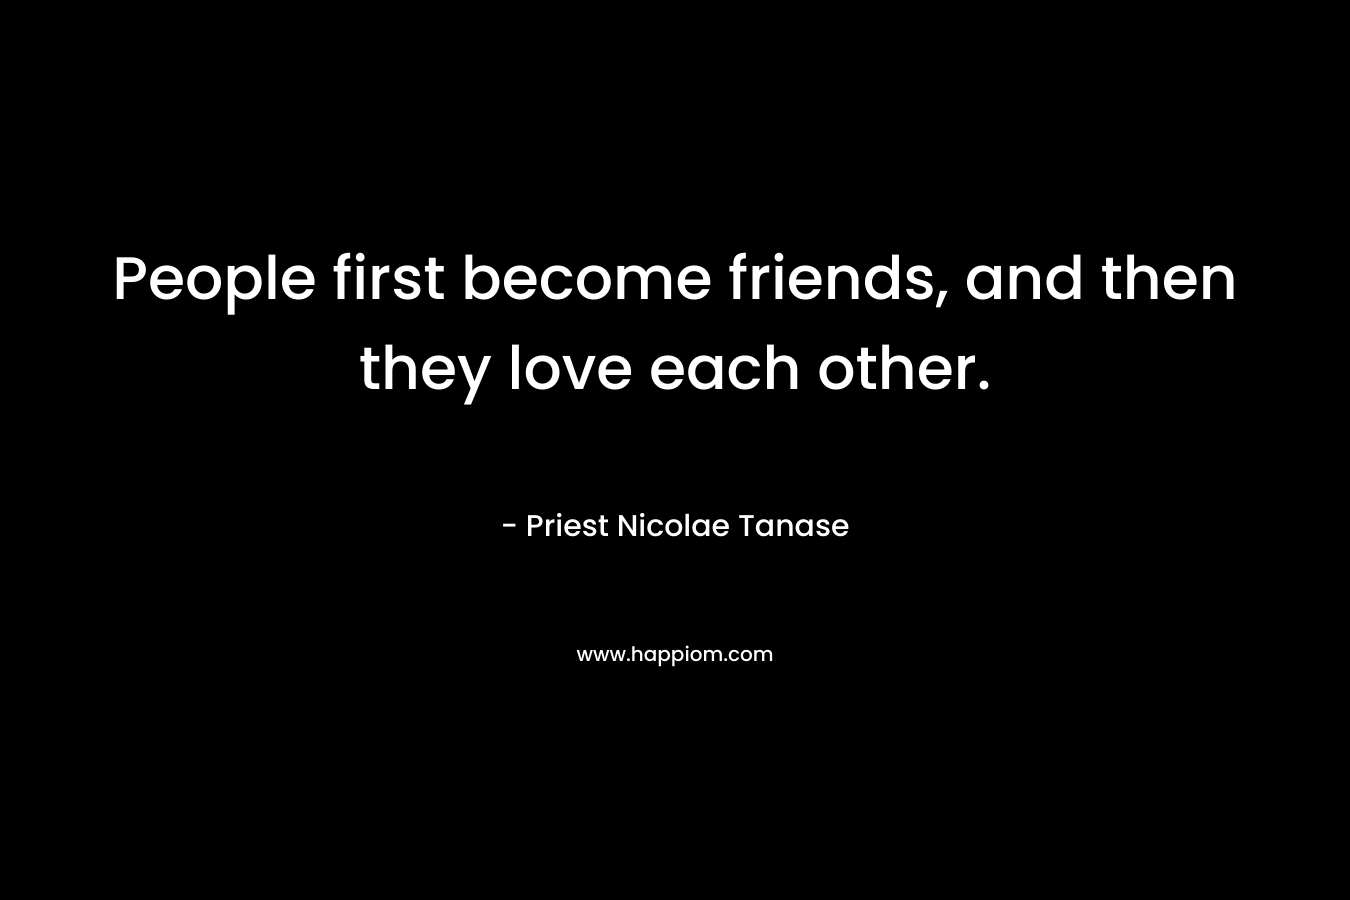 People first become friends, and then they love each other. – Priest Nicolae Tanase